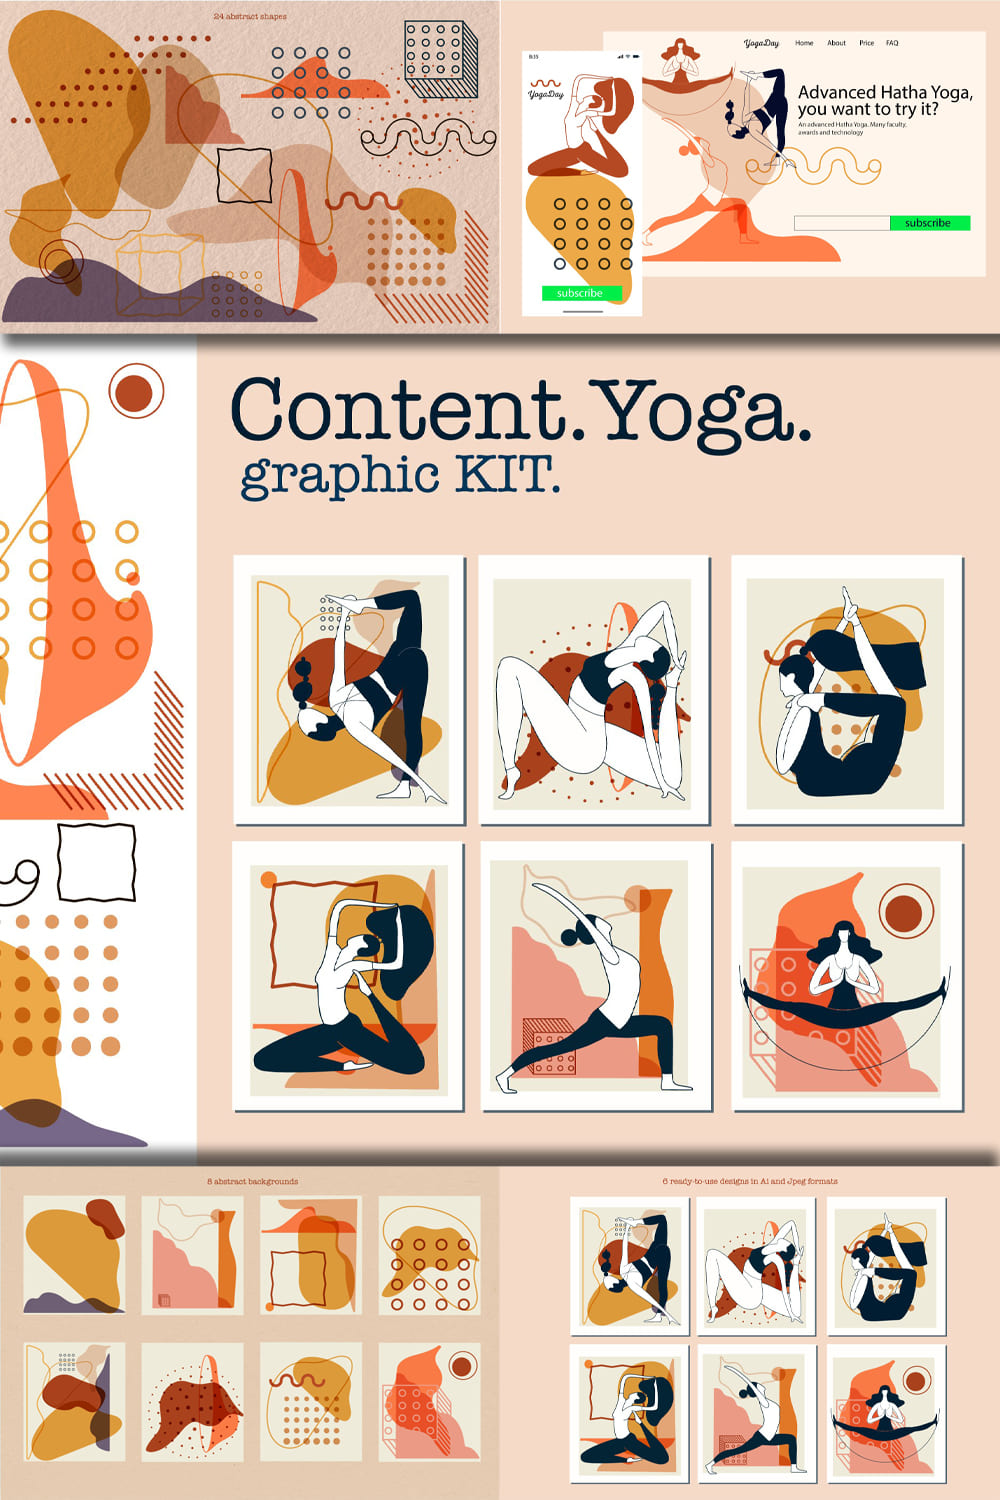 Content yoga graphic kit - pinterest image preview.